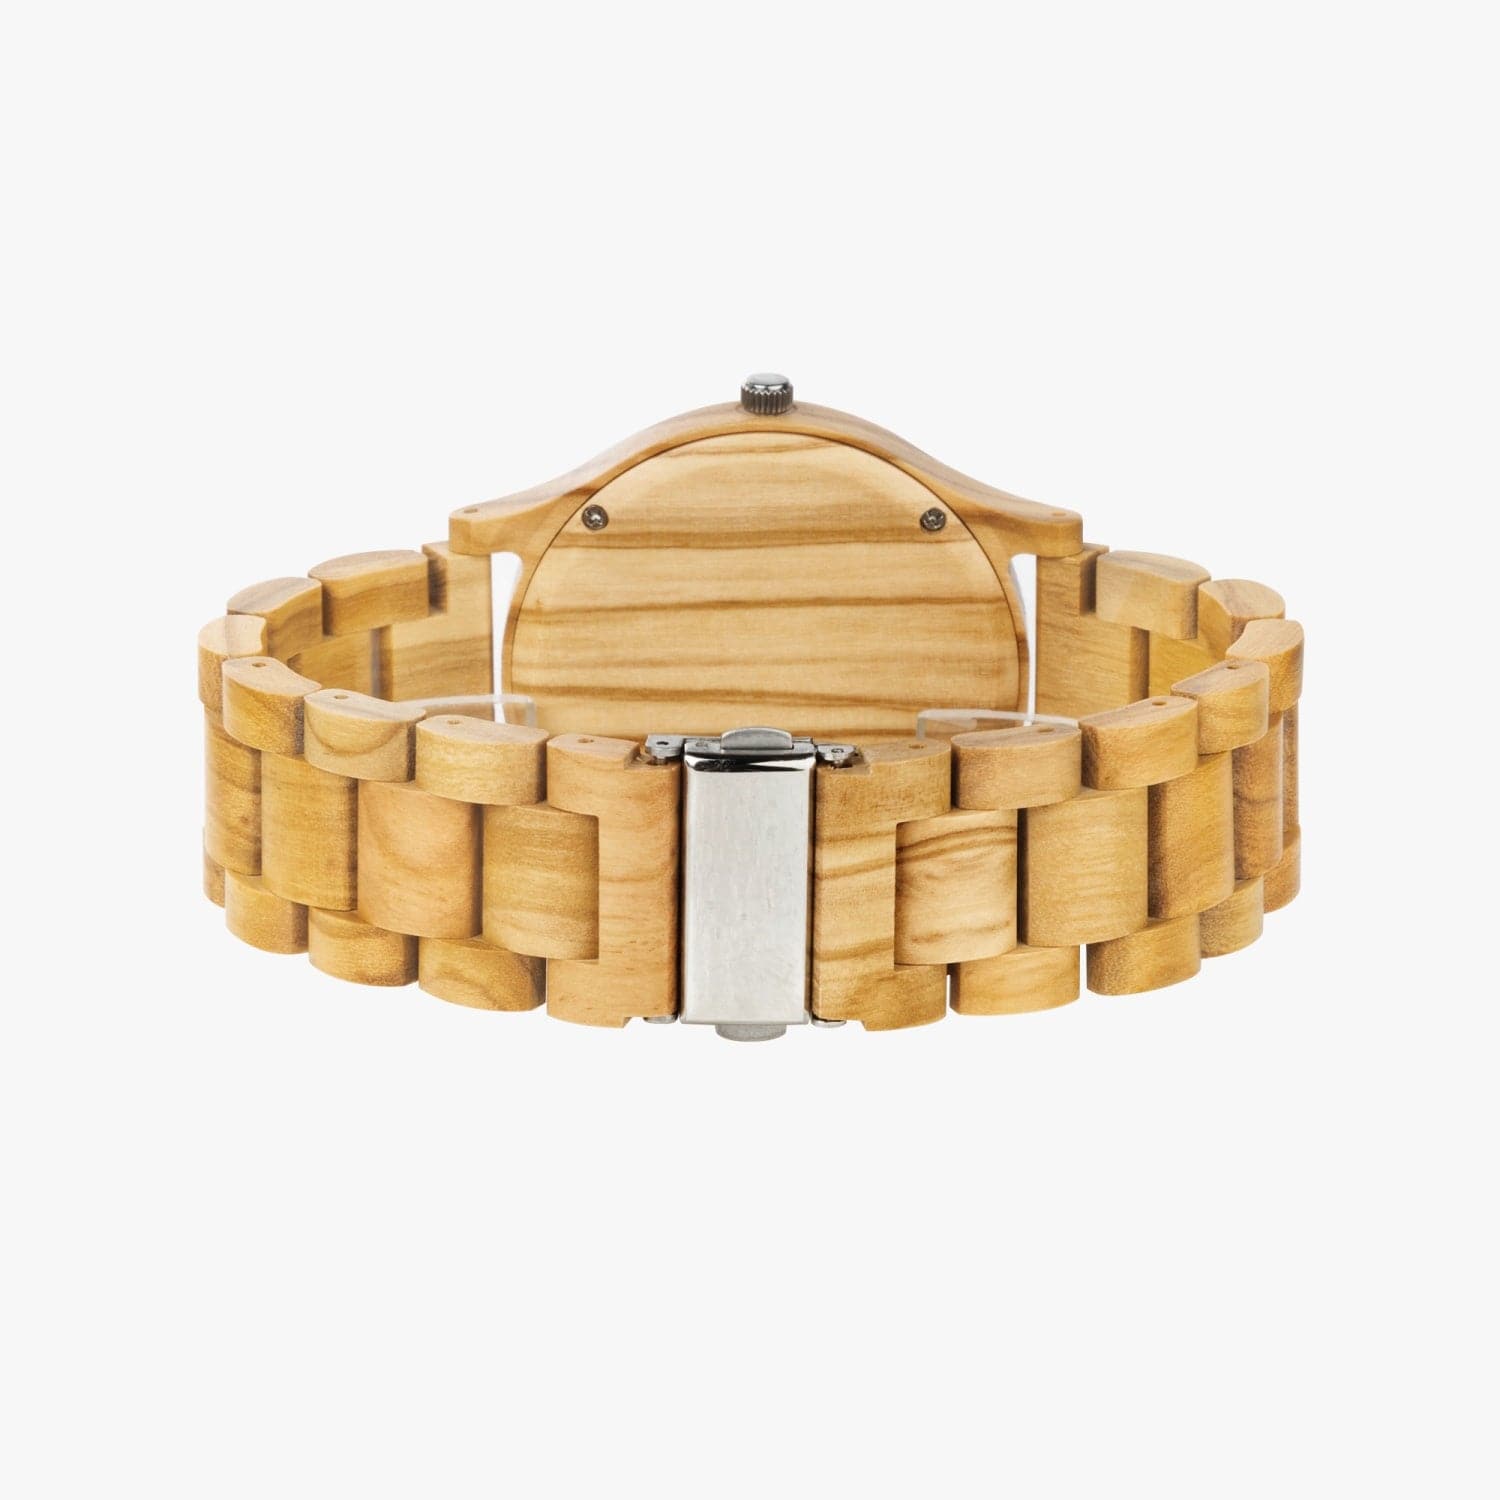 Frosted Leafs,  Olive Lumber Wooden Watch, designed by Sensus Studio Design